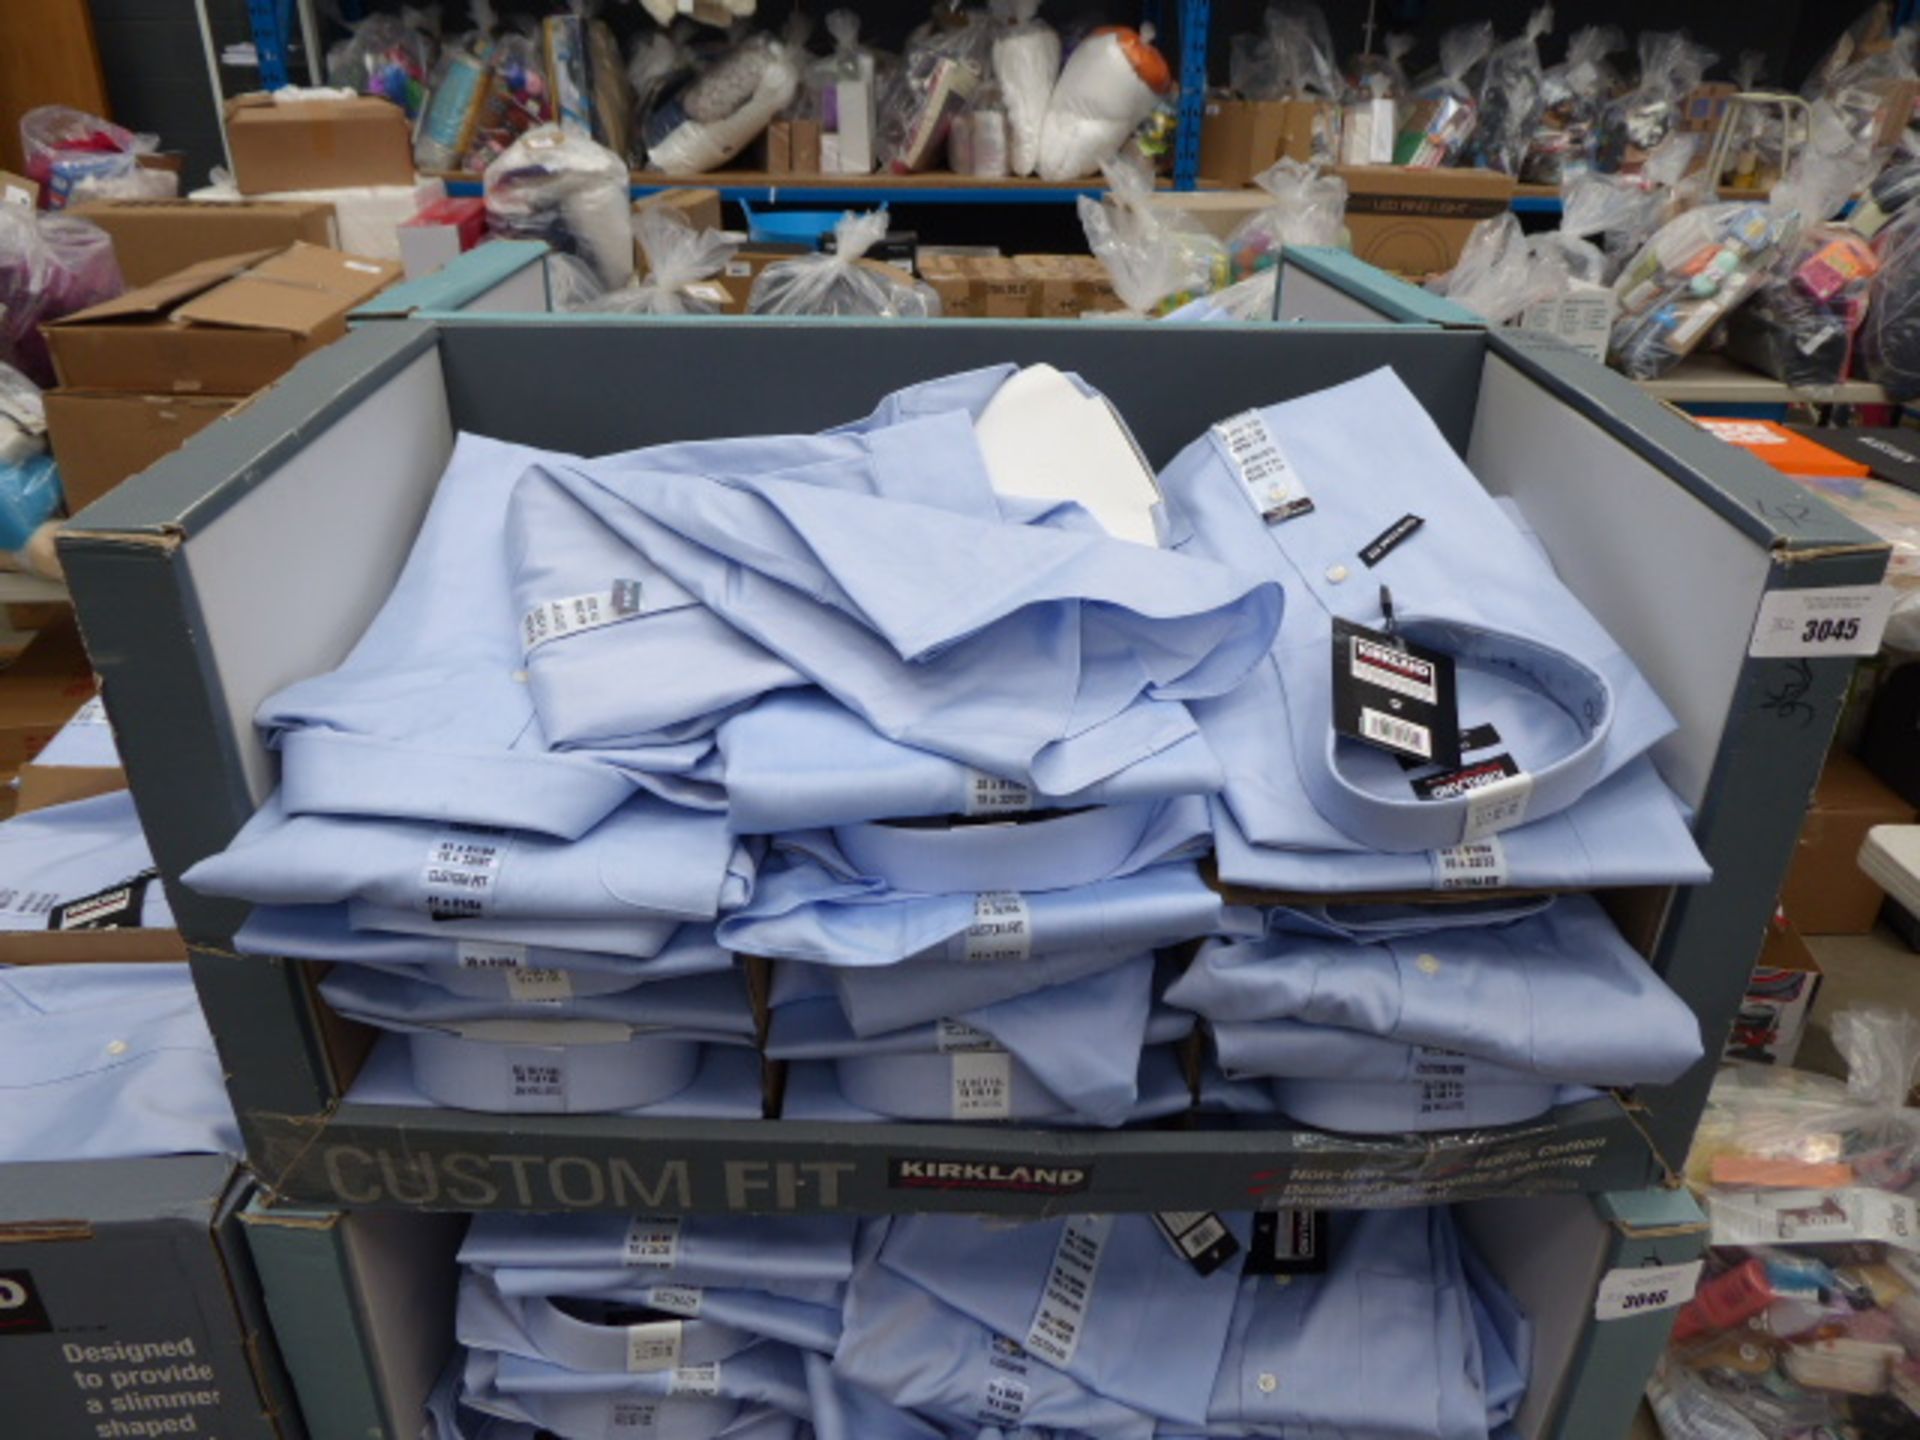 Tray containing approx 32 men's Kirkland custom fit shirts in light blue